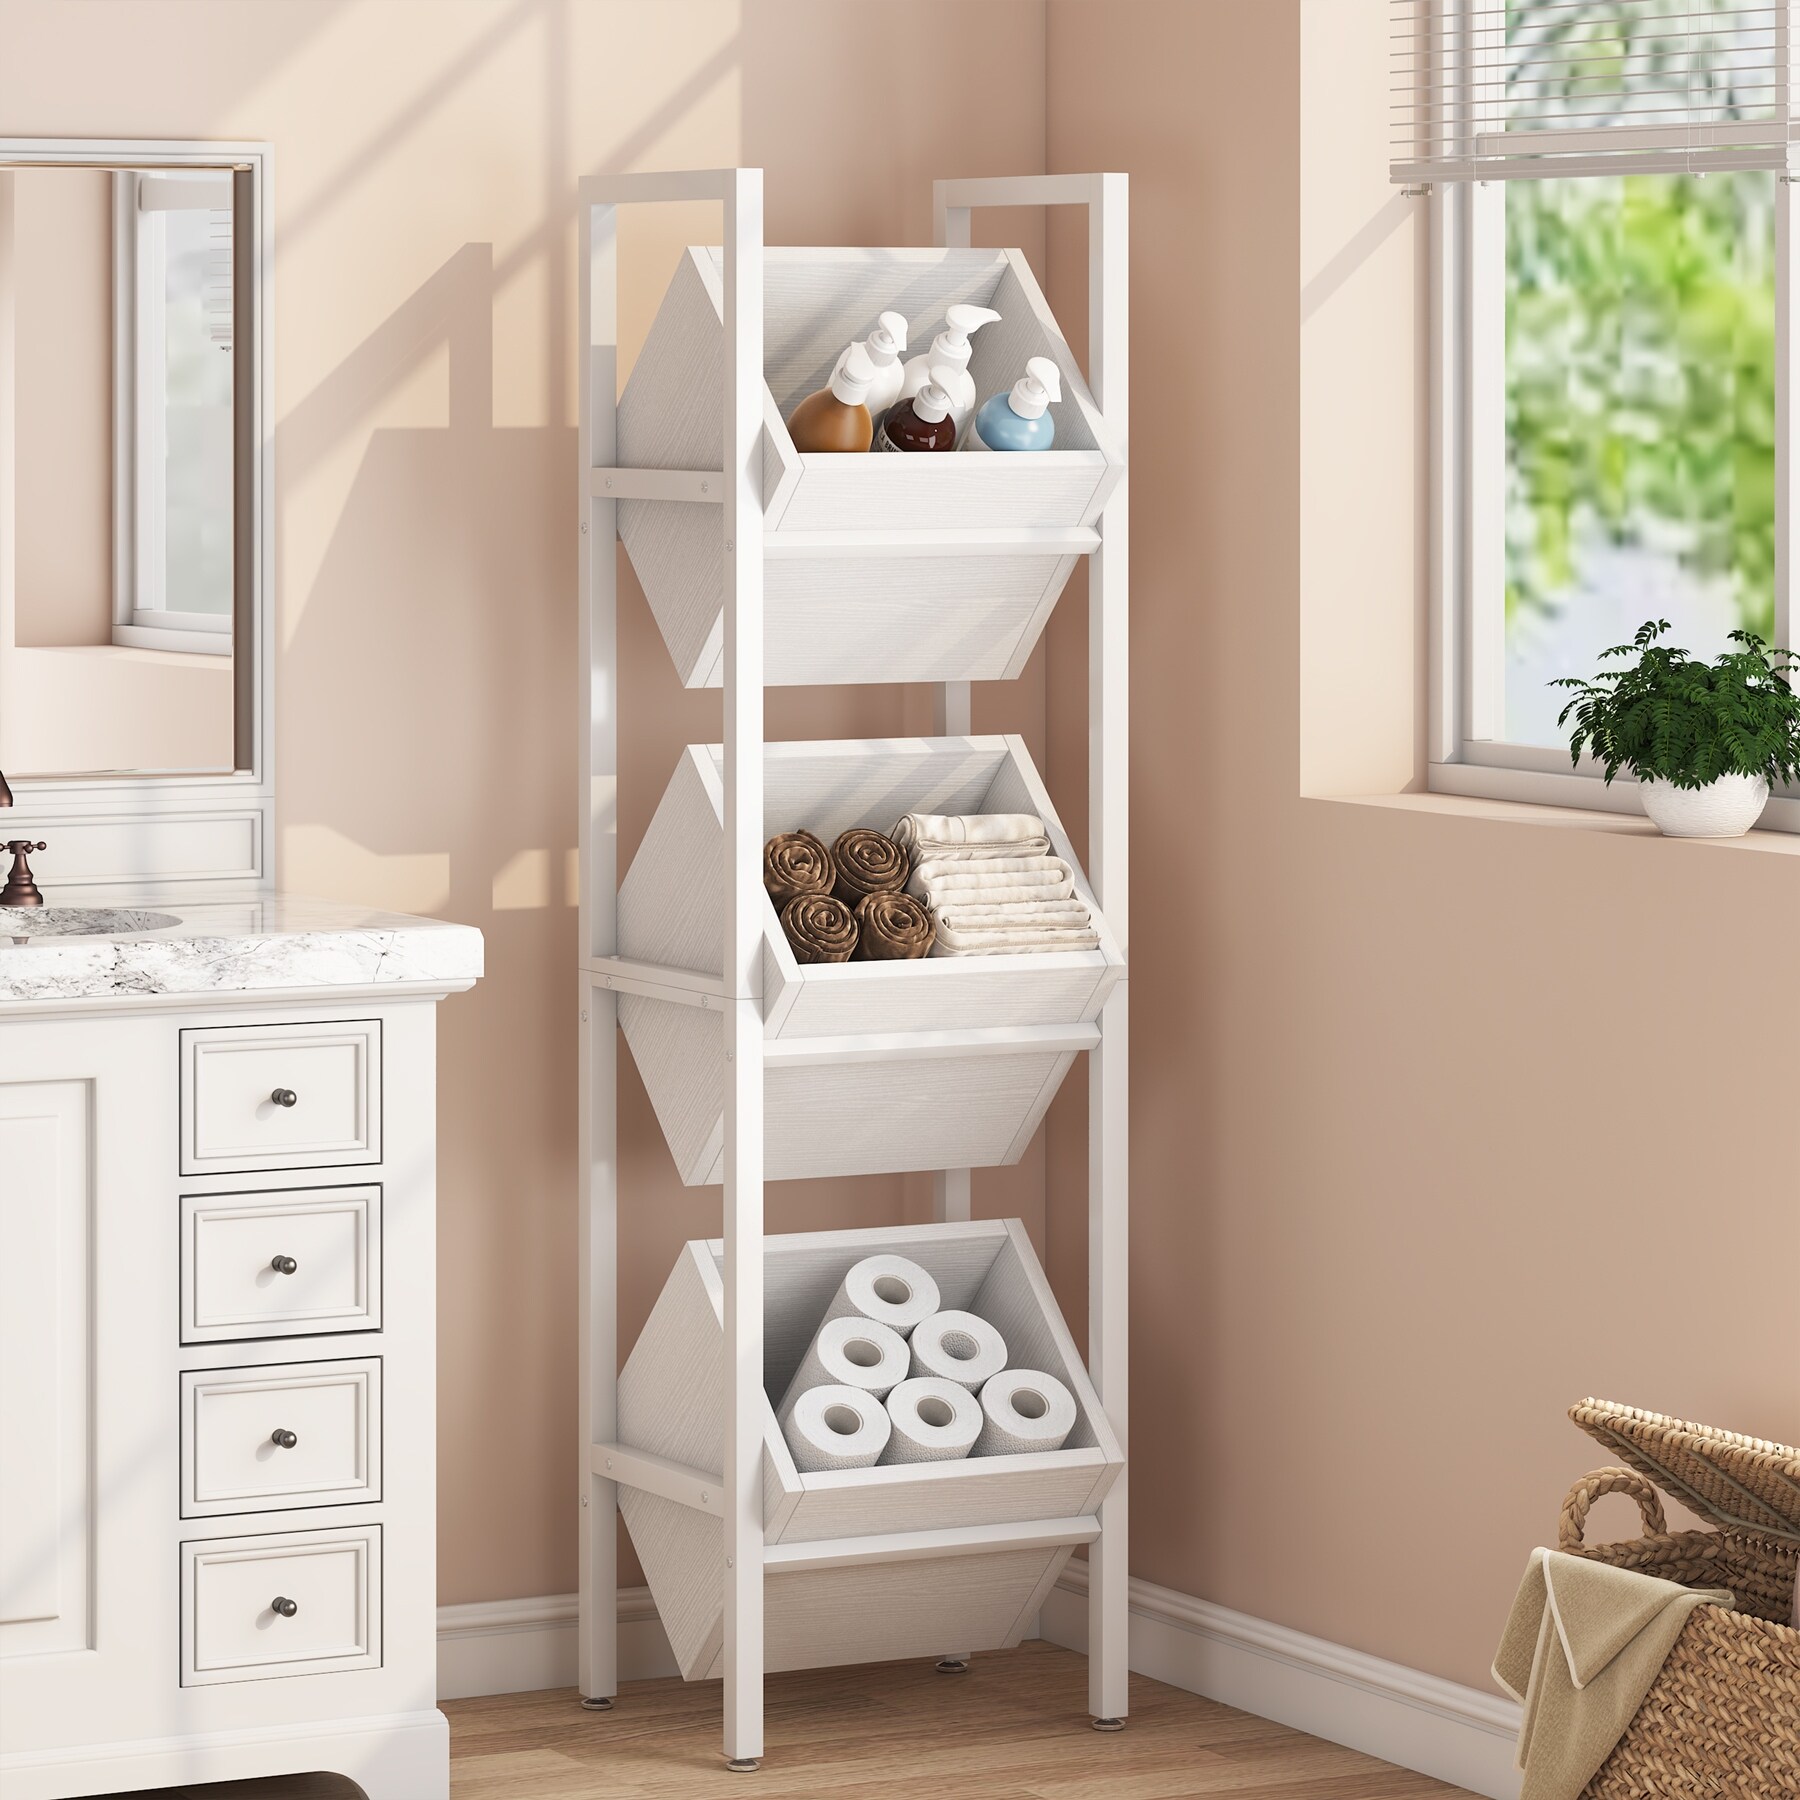 https://ak1.ostkcdn.com/images/products/is/images/direct/ce96bf2a6b7b1bd1cae33e6cb1c0928f723c1e88/Vertical-Standing-Basket-Storage-Tower-for-Kitchen-Bathroom-Living-Room.jpg